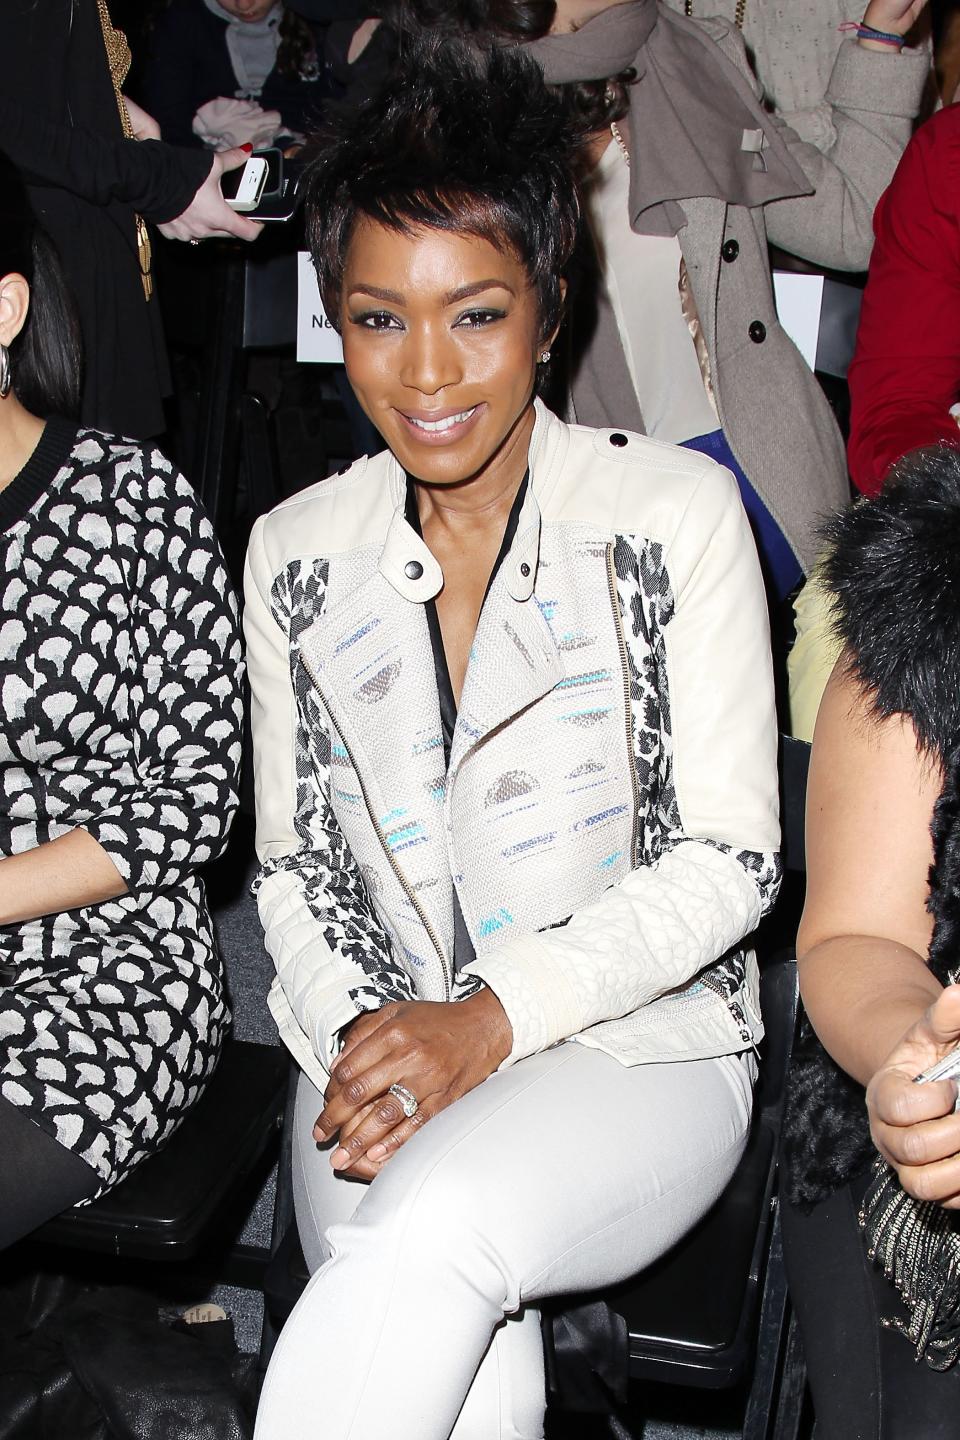 This image released by Starpix shows actress Angela Bassett at the Tracy Reese Fall 2013 show during Fashion Week in New York, Sunday, Feb. 10, 2013. (AP Photo/Starpix, Kristina Bumphrey)